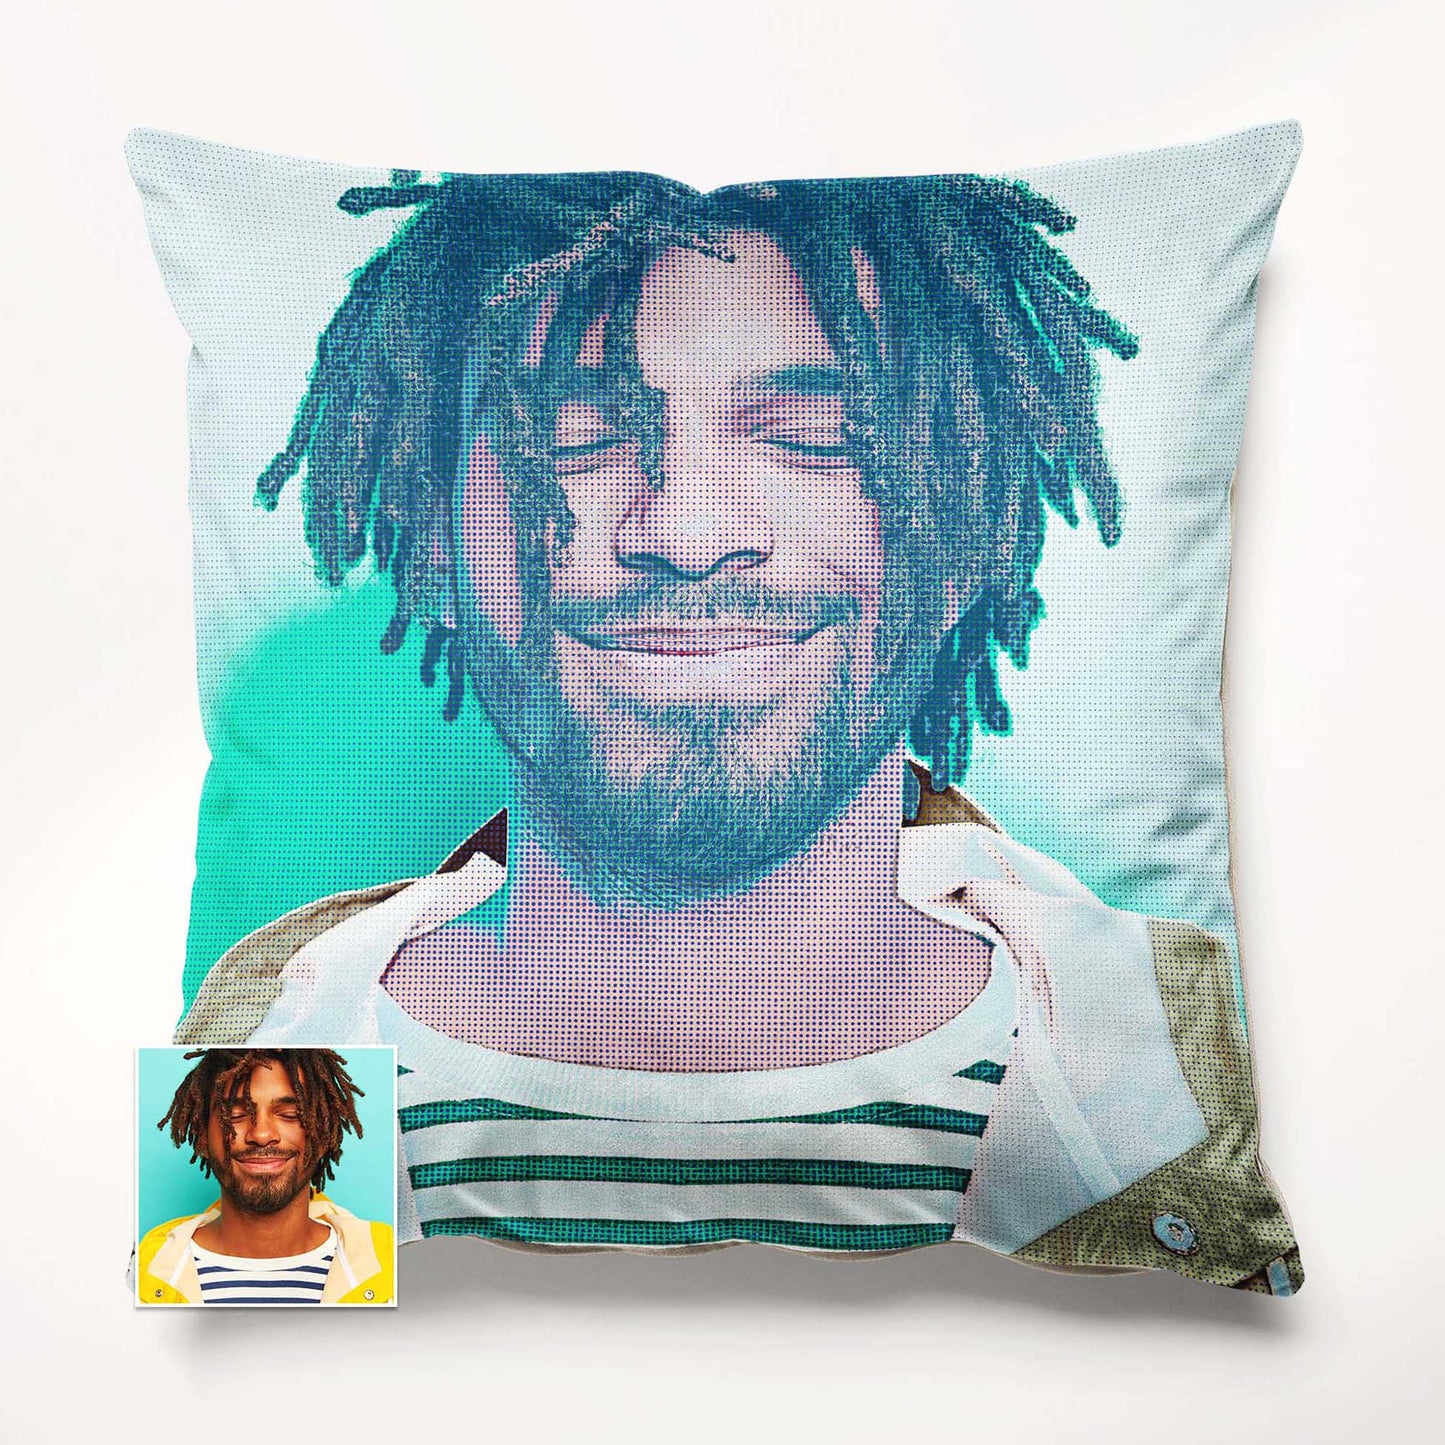 Embrace the nostalgia of old school aesthetics with the Personalised Teal Grunge Cushion. Custom printed from your photo, it features a unique halftone effect and grunge texture that adds character to your home decor, handmade